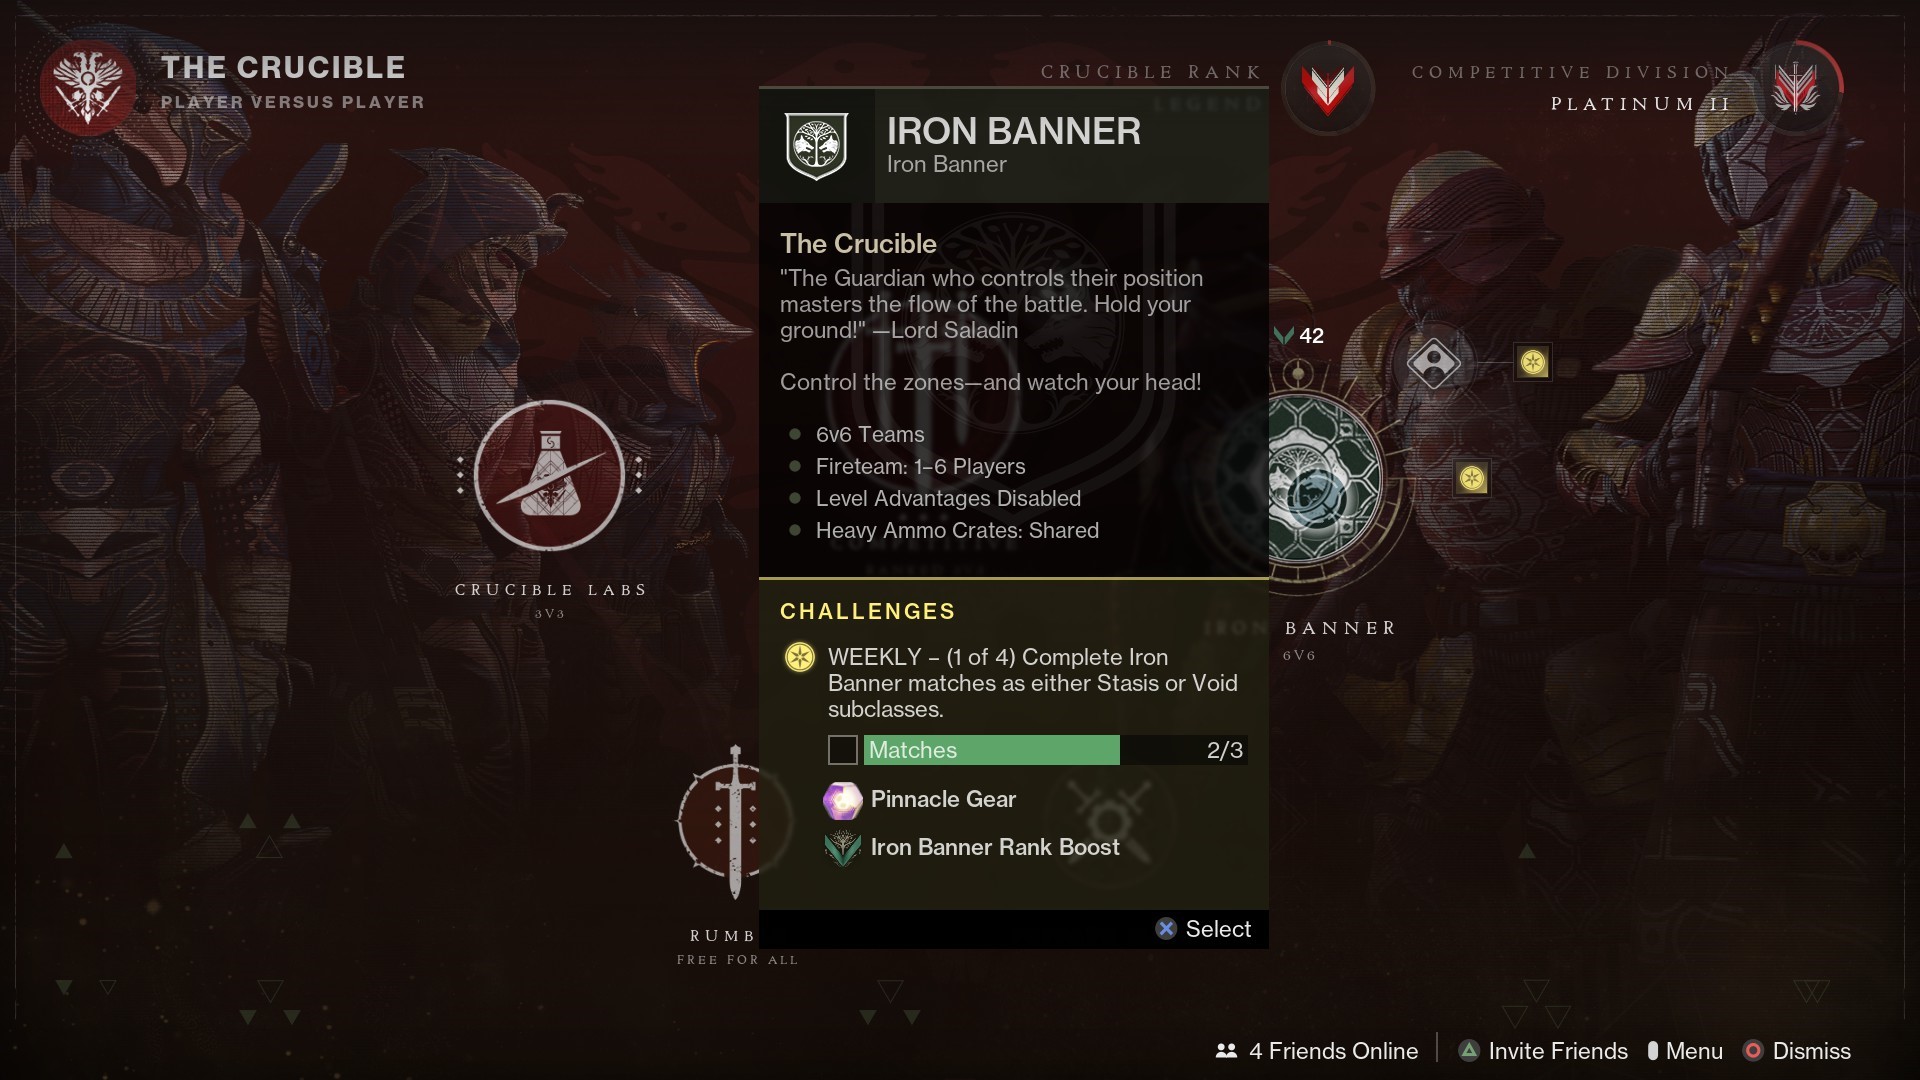 Destiny 2 Iron Bannner daily challenges in menu